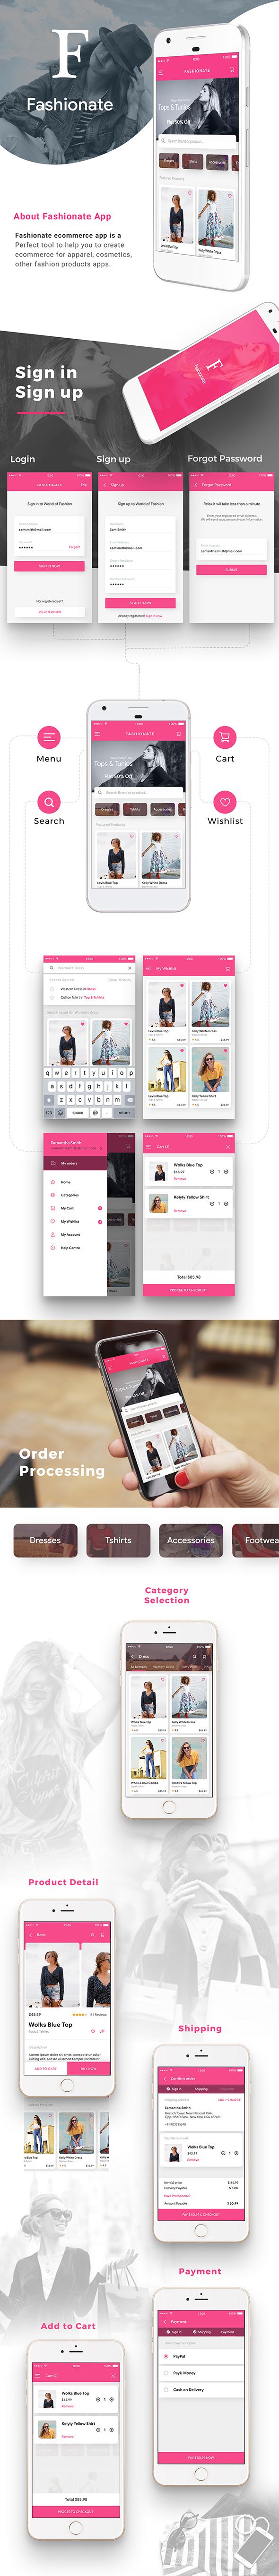 Fashion Ecommerce Android App+ Ecommerce iOS Template (HTML + CSS IONIC Framework)| Fashionate - 1